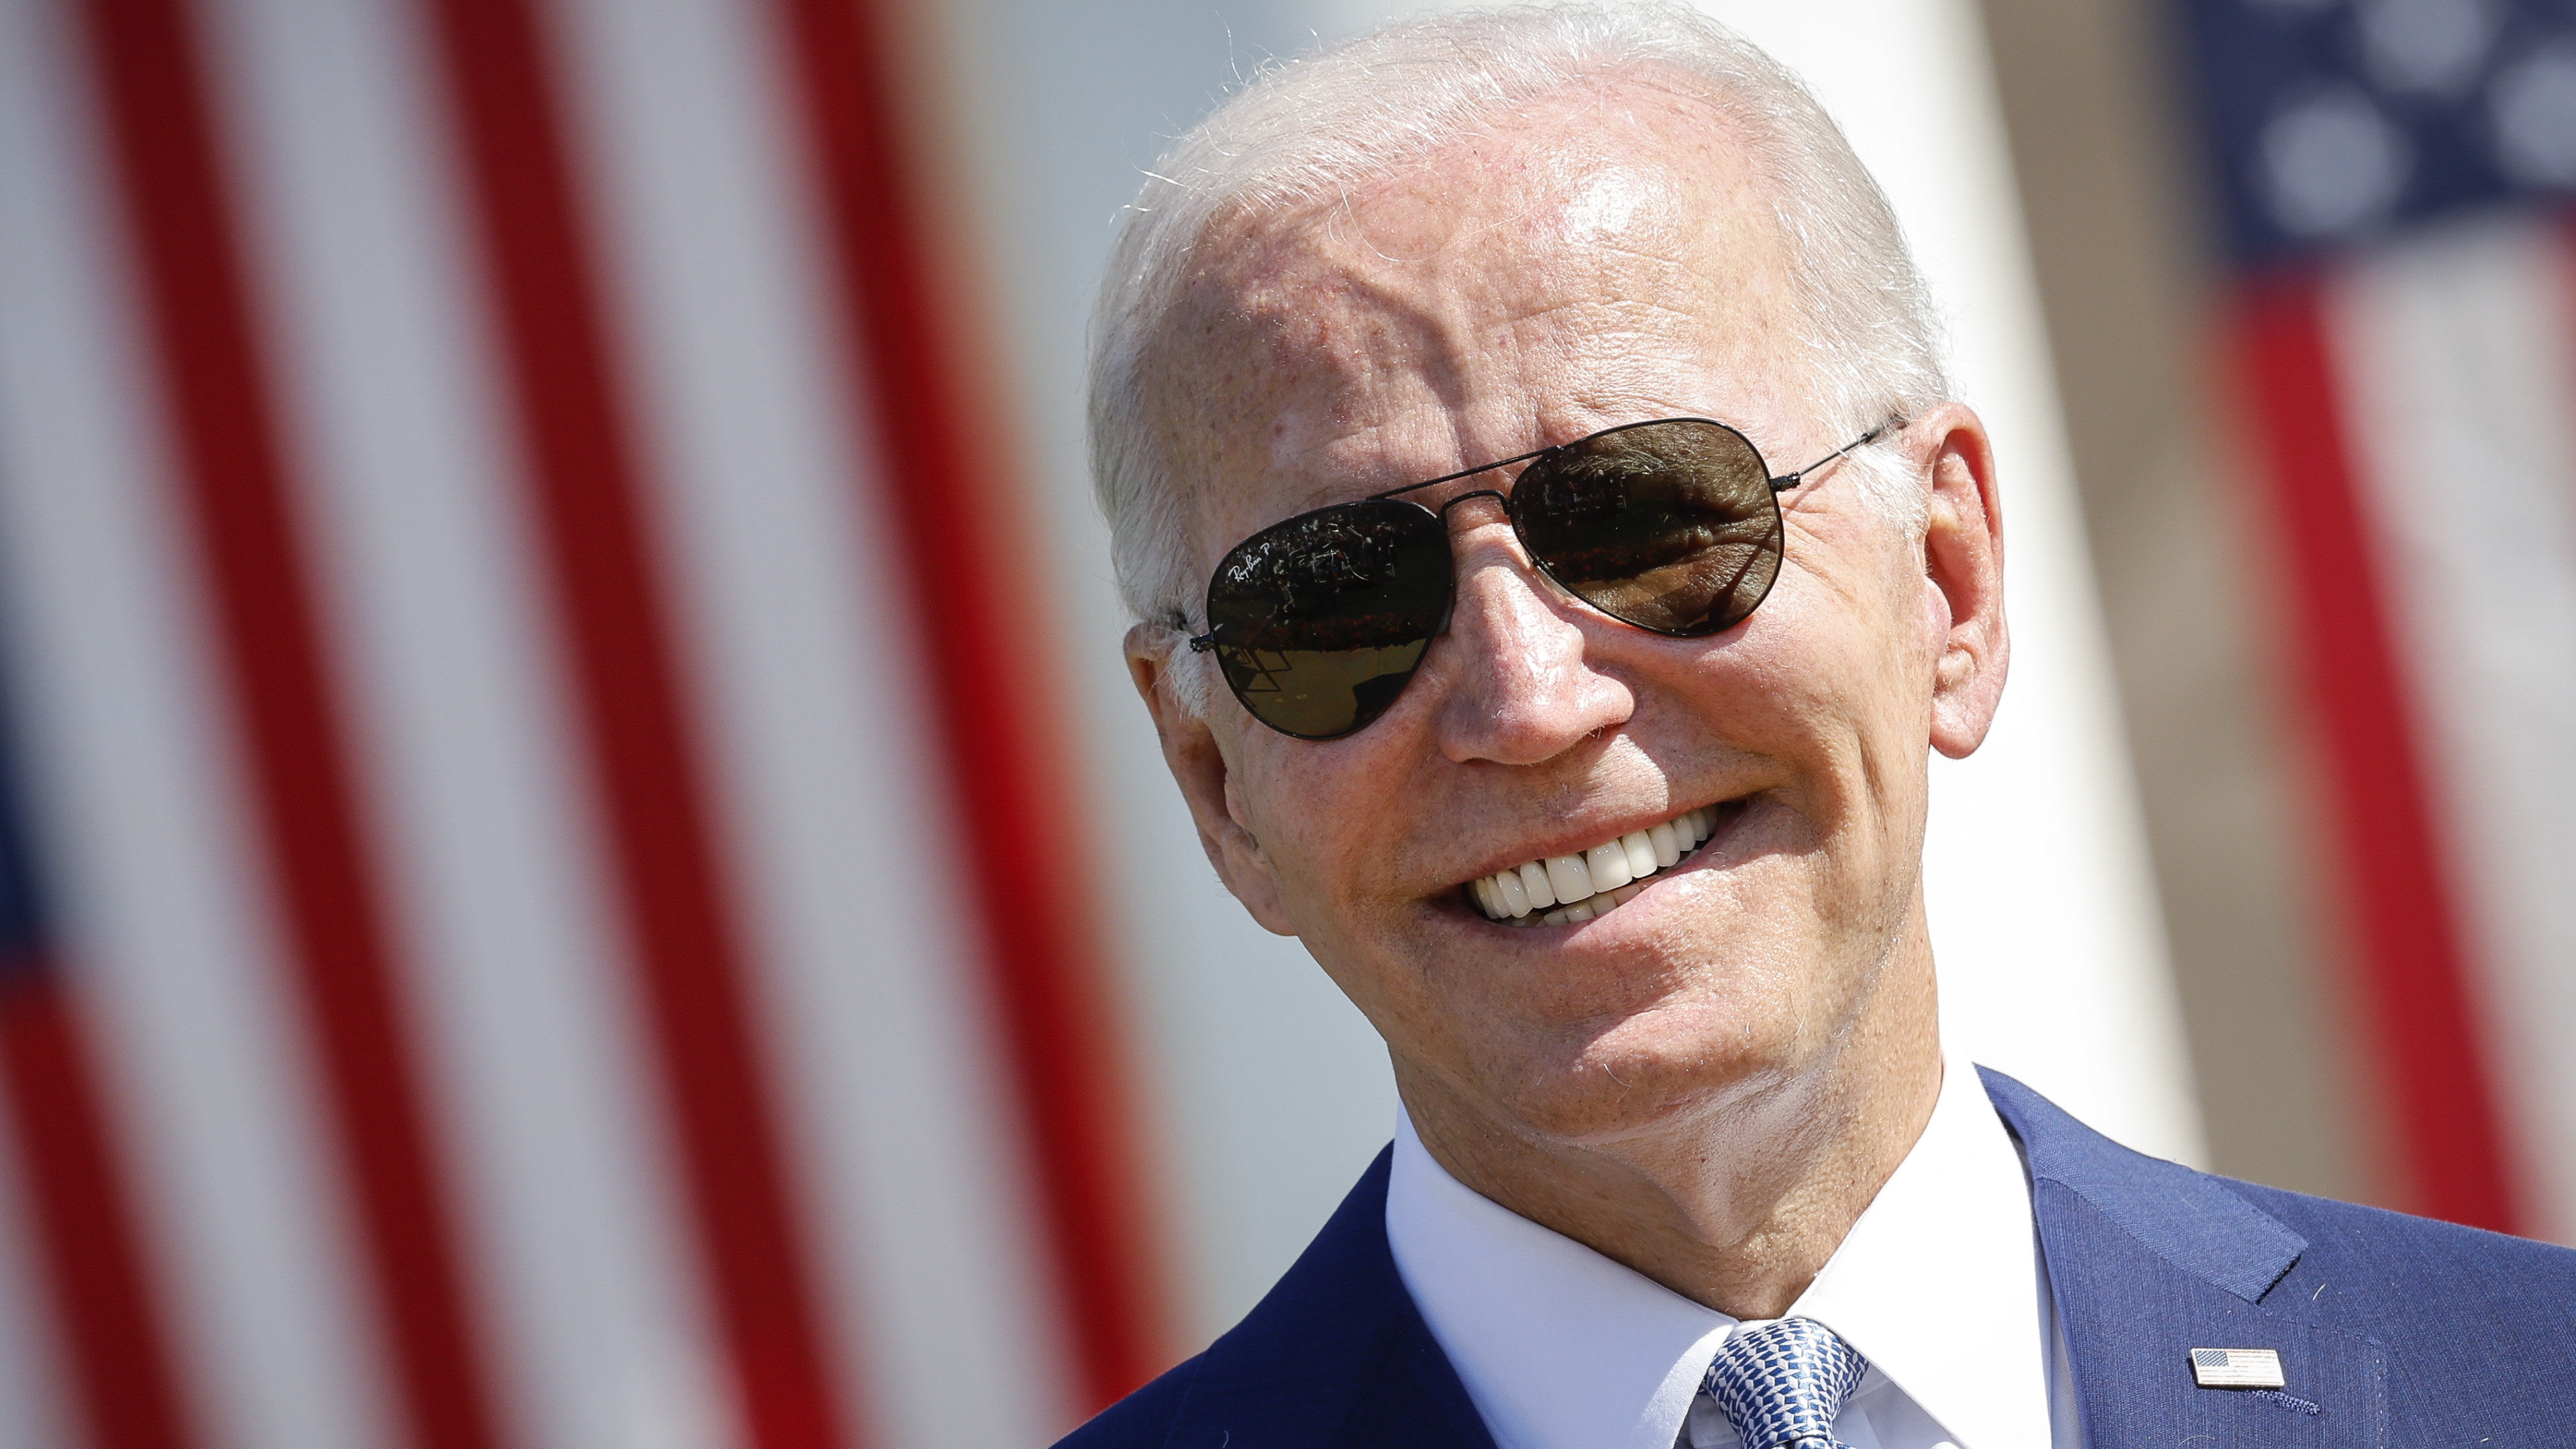  'Joe Biden', who may or may not be the US president, is absolutely dominating Guilty Gear fighting tournaments 